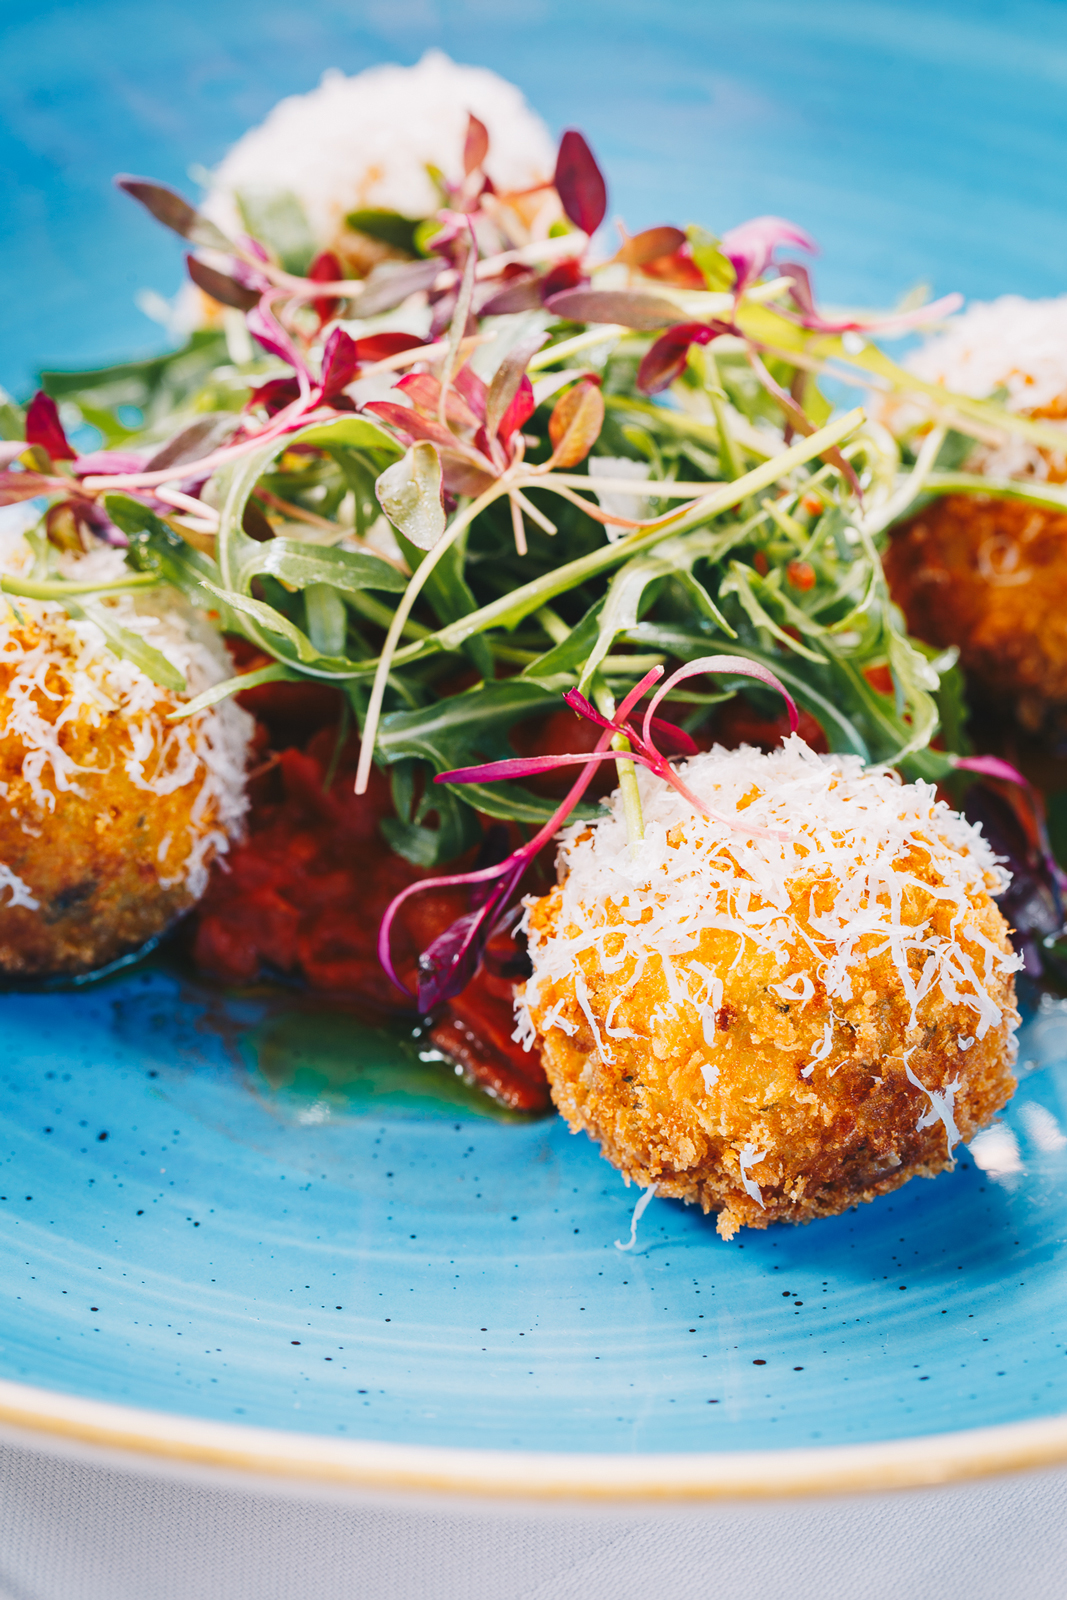 Arancini at Purchases, Chichester